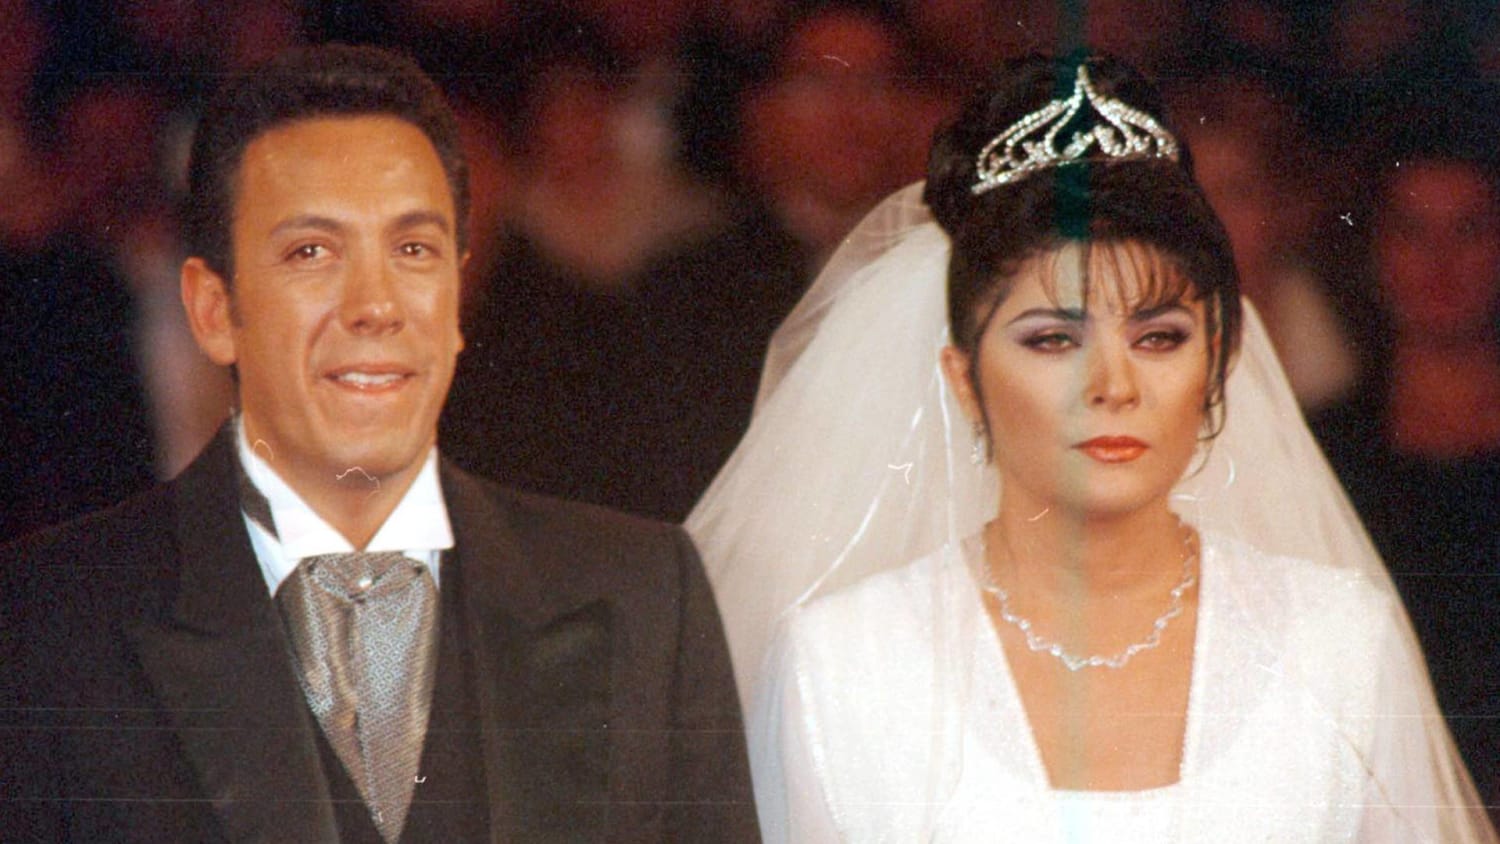 Victoria Ruffo will be a grandmother, but estranged from her husband